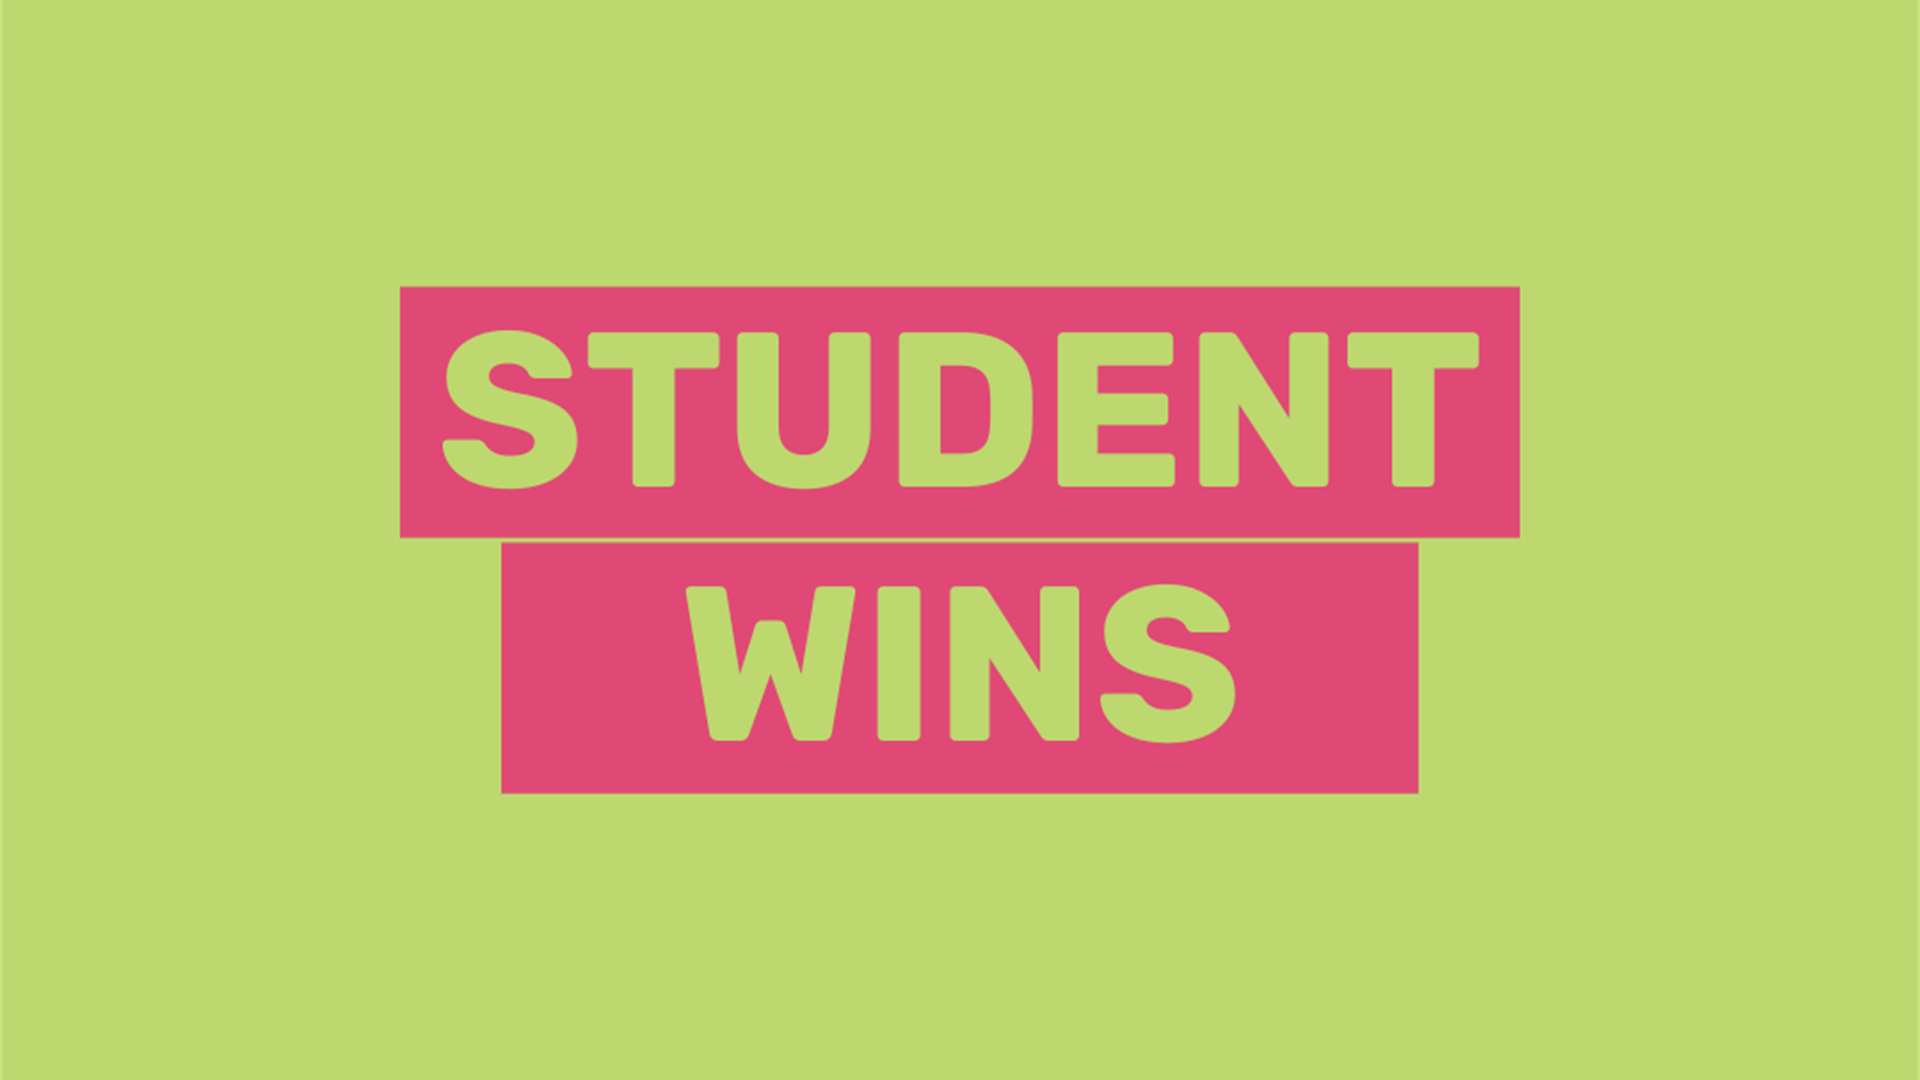 Check out the most recent wins that have been achieved for Arts students through successful student-led campaigns and lobbying.